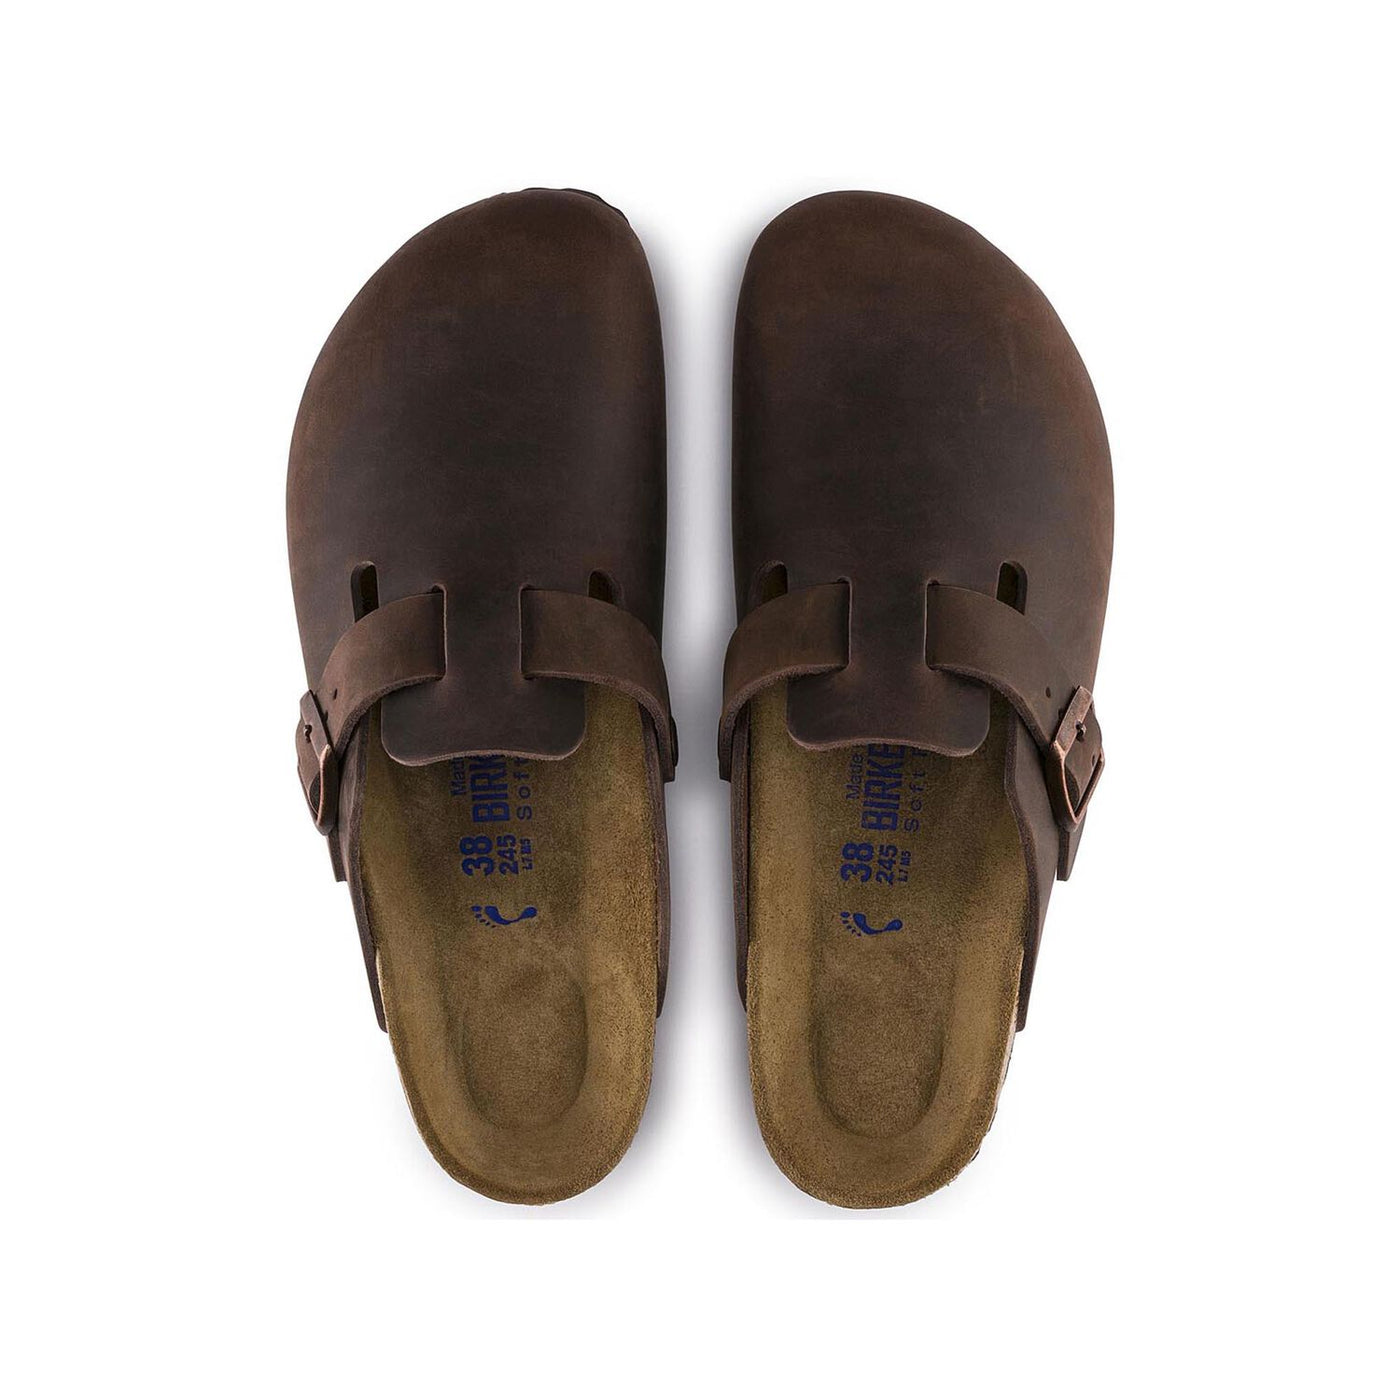 BOSTON SOFT FOOTBED OILED LEATHER